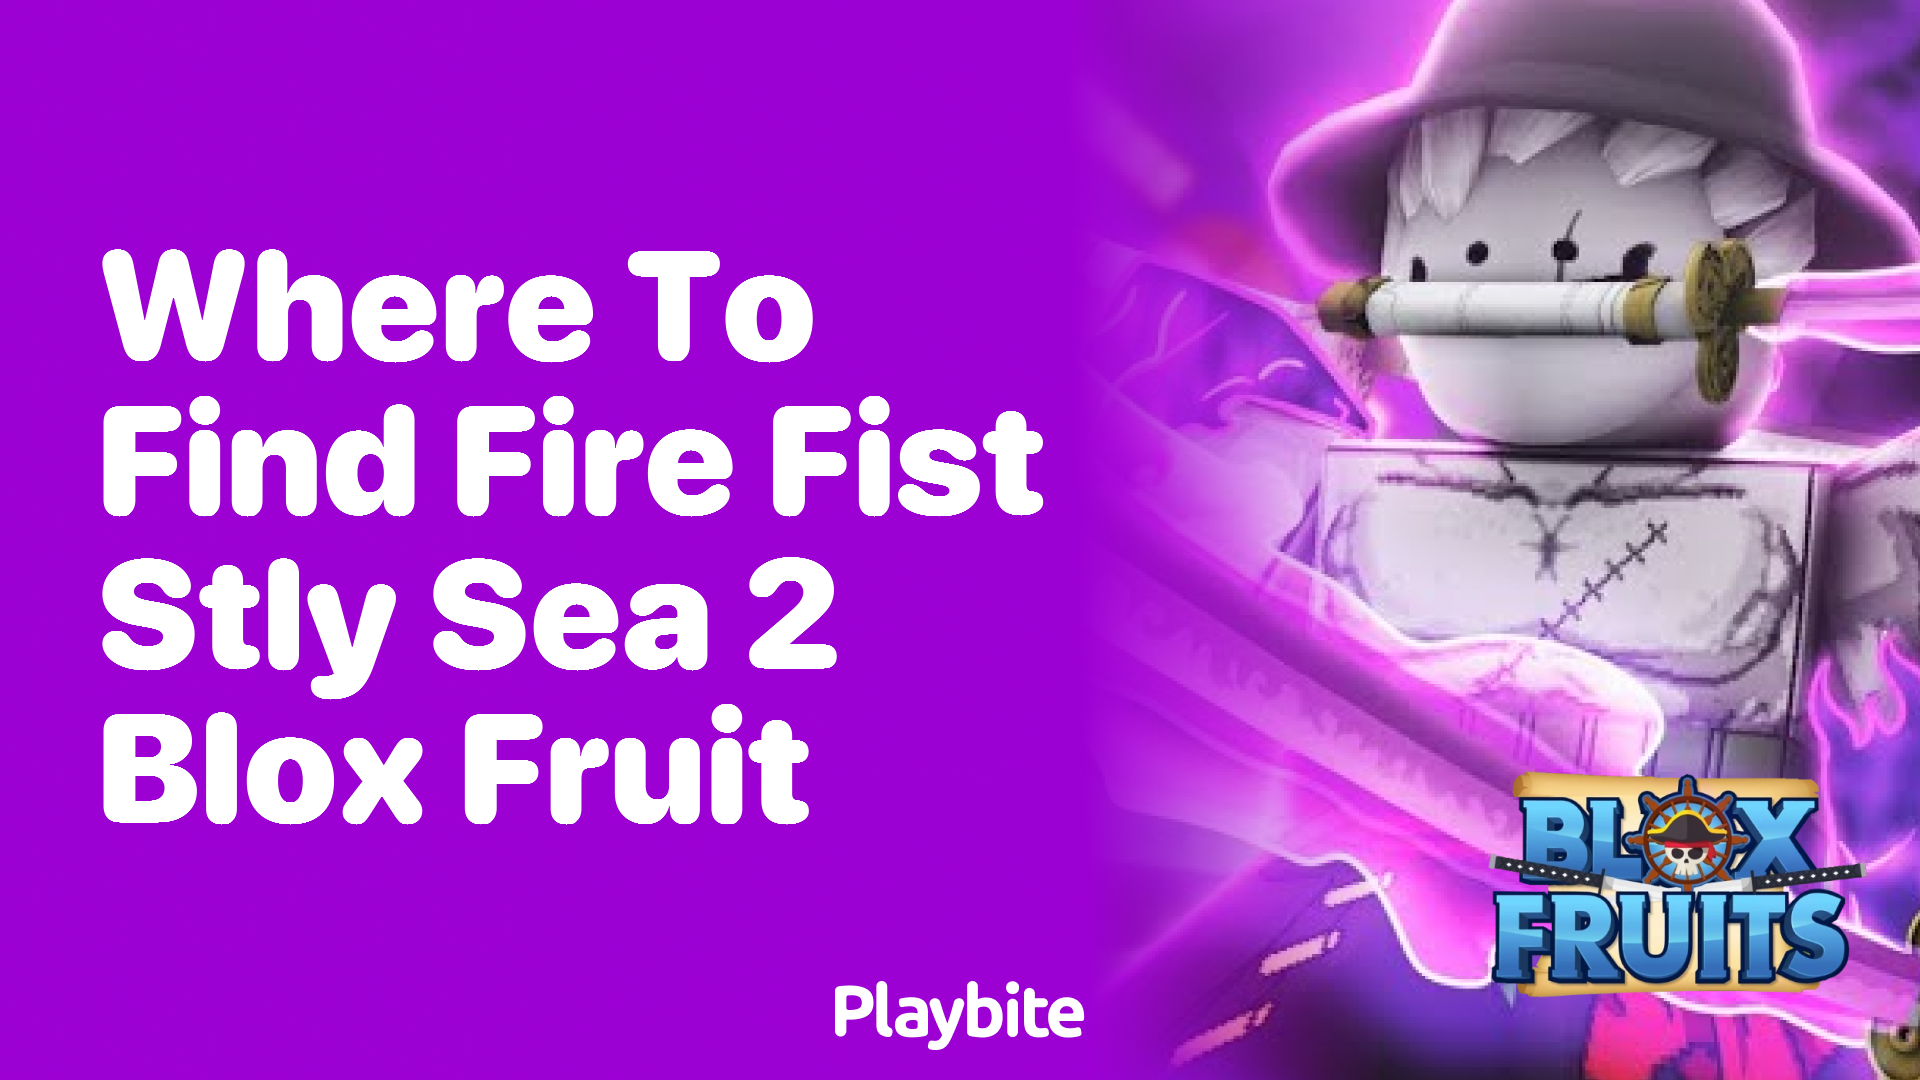 Where to Find Fire Fist in Sea 2 of Blox Fruit?